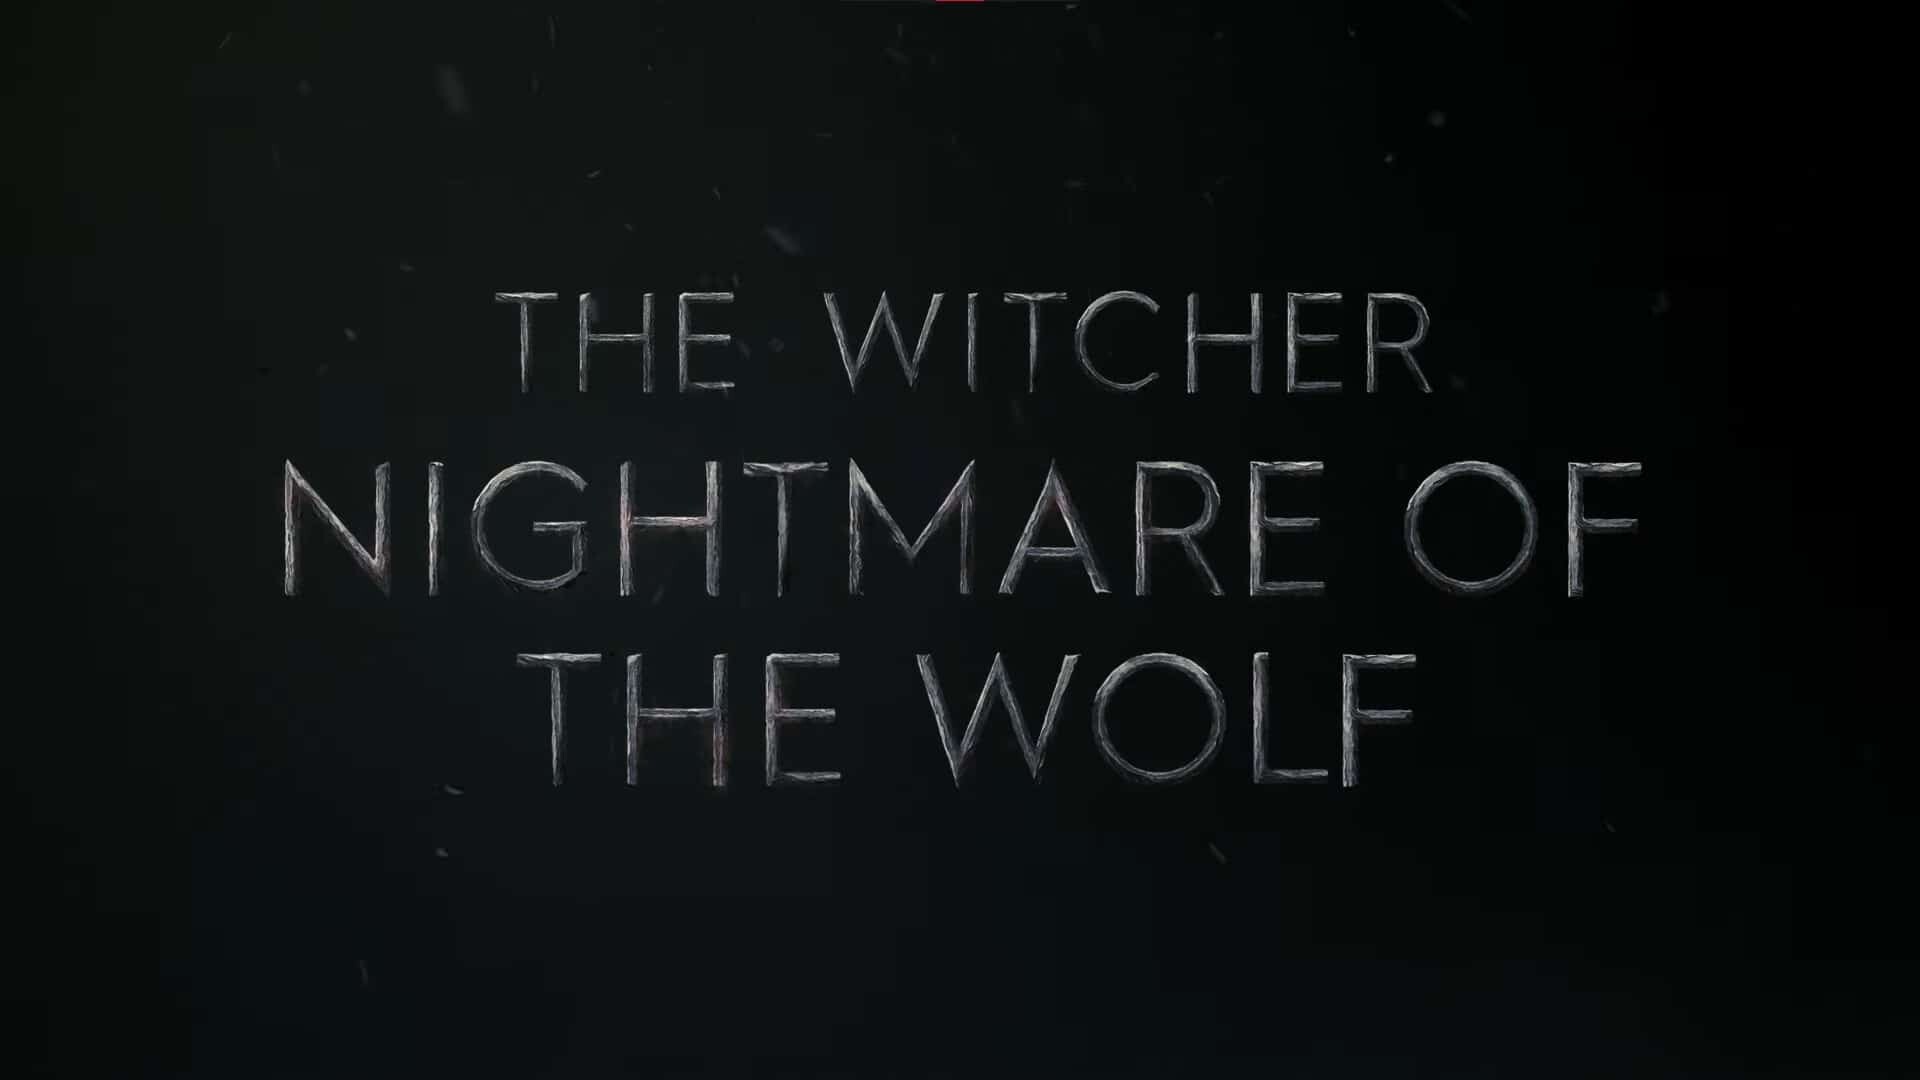 The Witcher: Nightmare of the Wolf: Dark fantasy, Partly Vesemir's origin story and partly the story of the fall of Kaer Morhen. 1920x1080 Full HD Background.